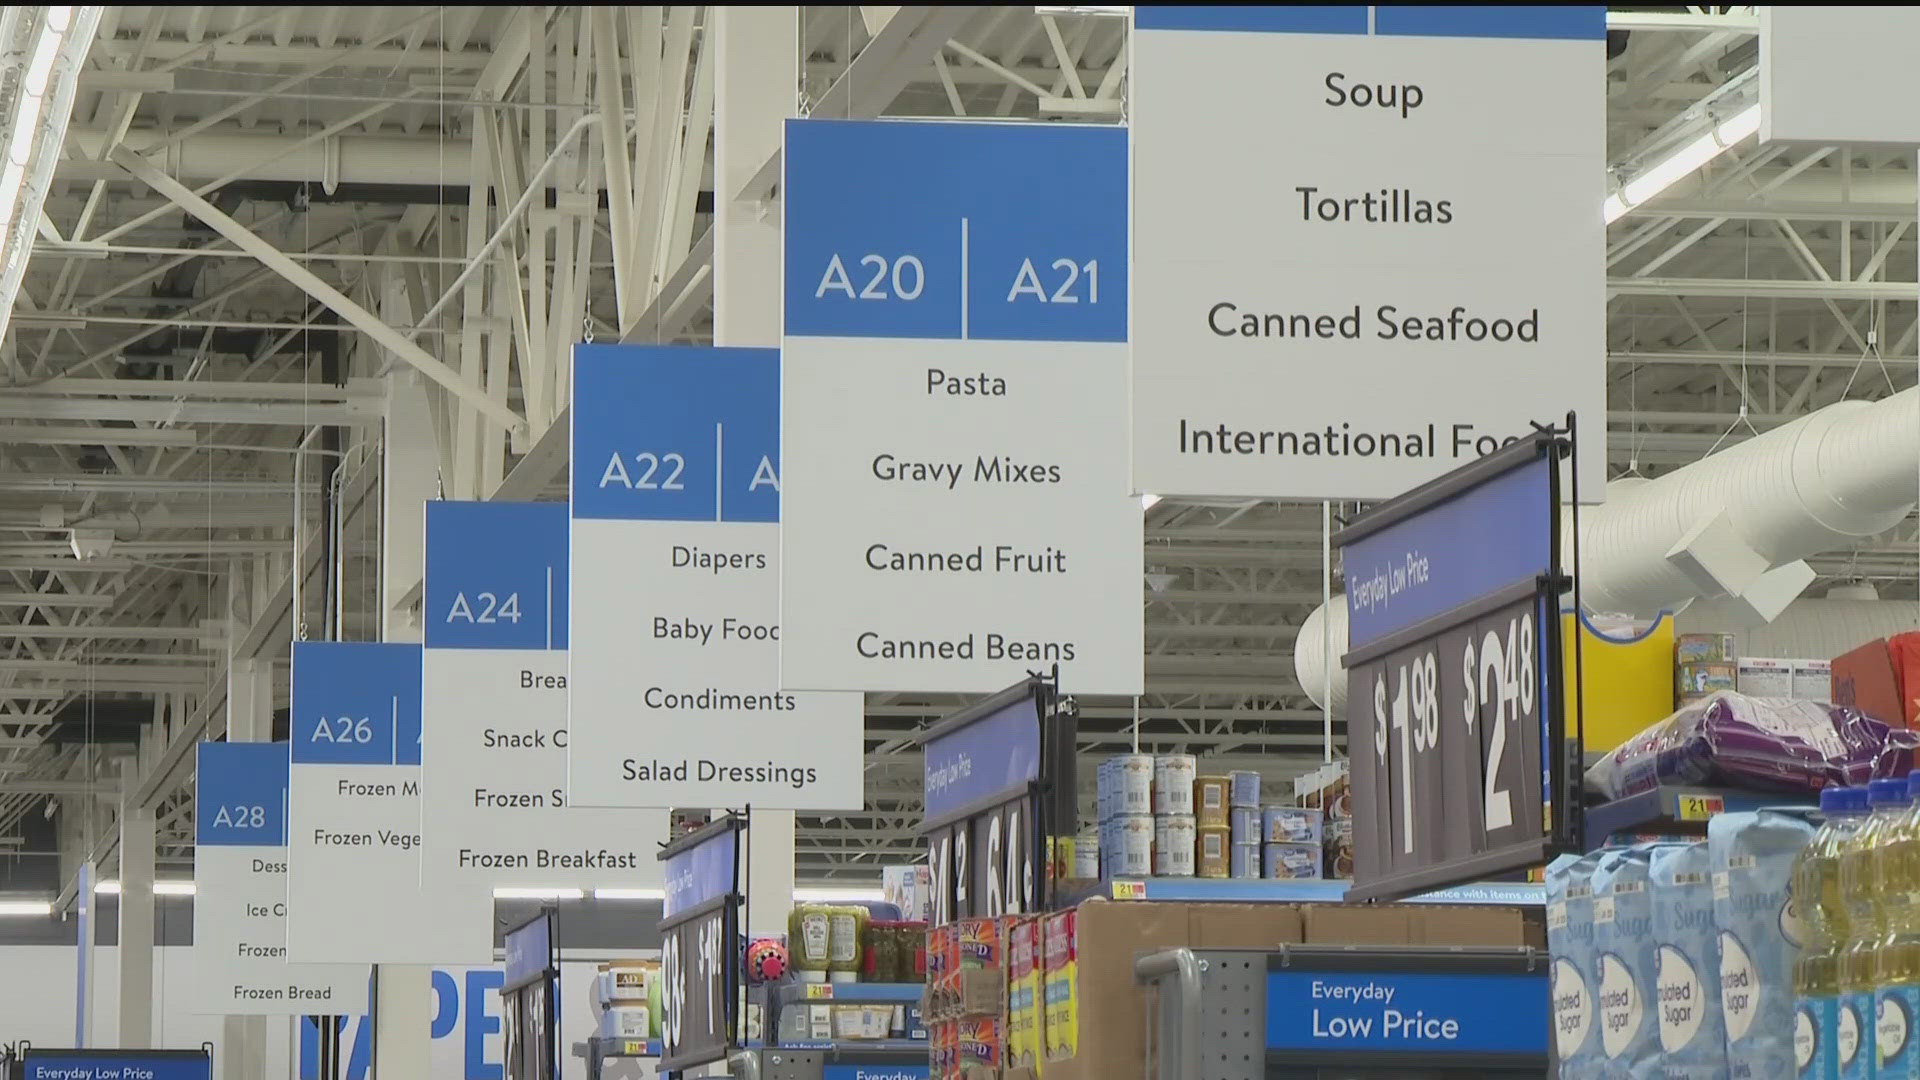 On Wednesday, Walmart held its re-grand opening as a 75,000 sq. ft. Neighborhood Market store.